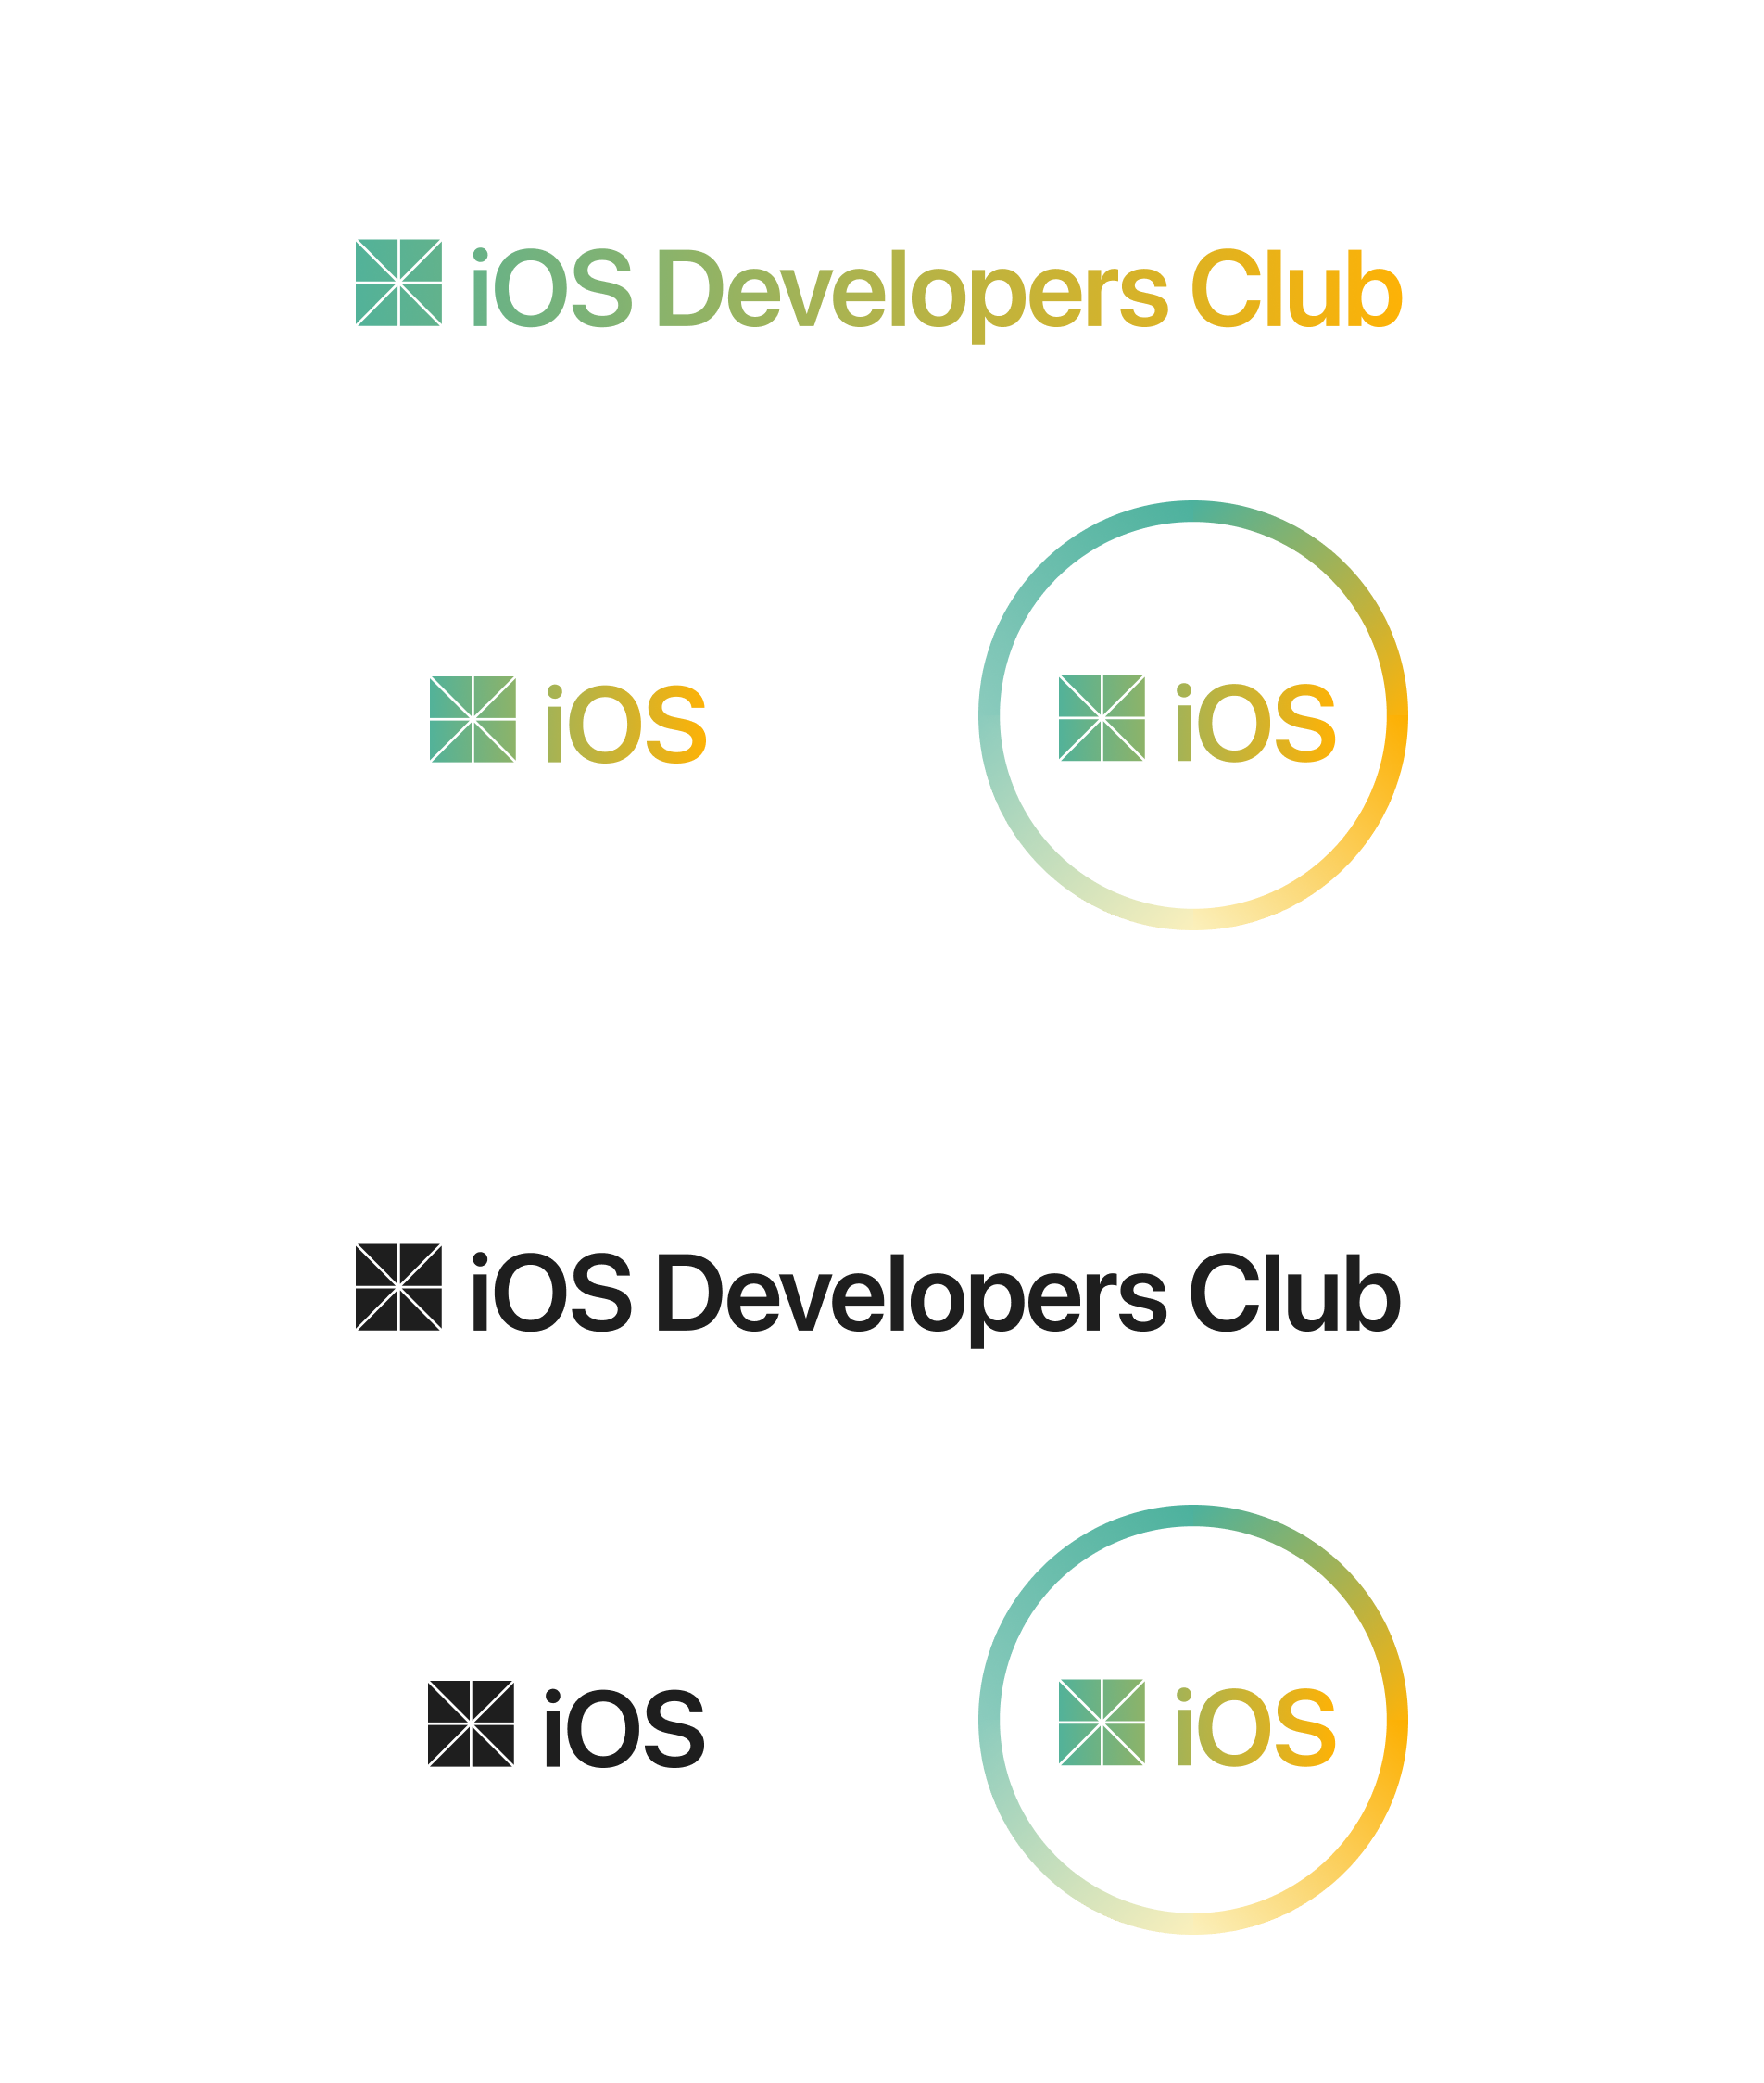 Logo designs for the iOS Developers Club.